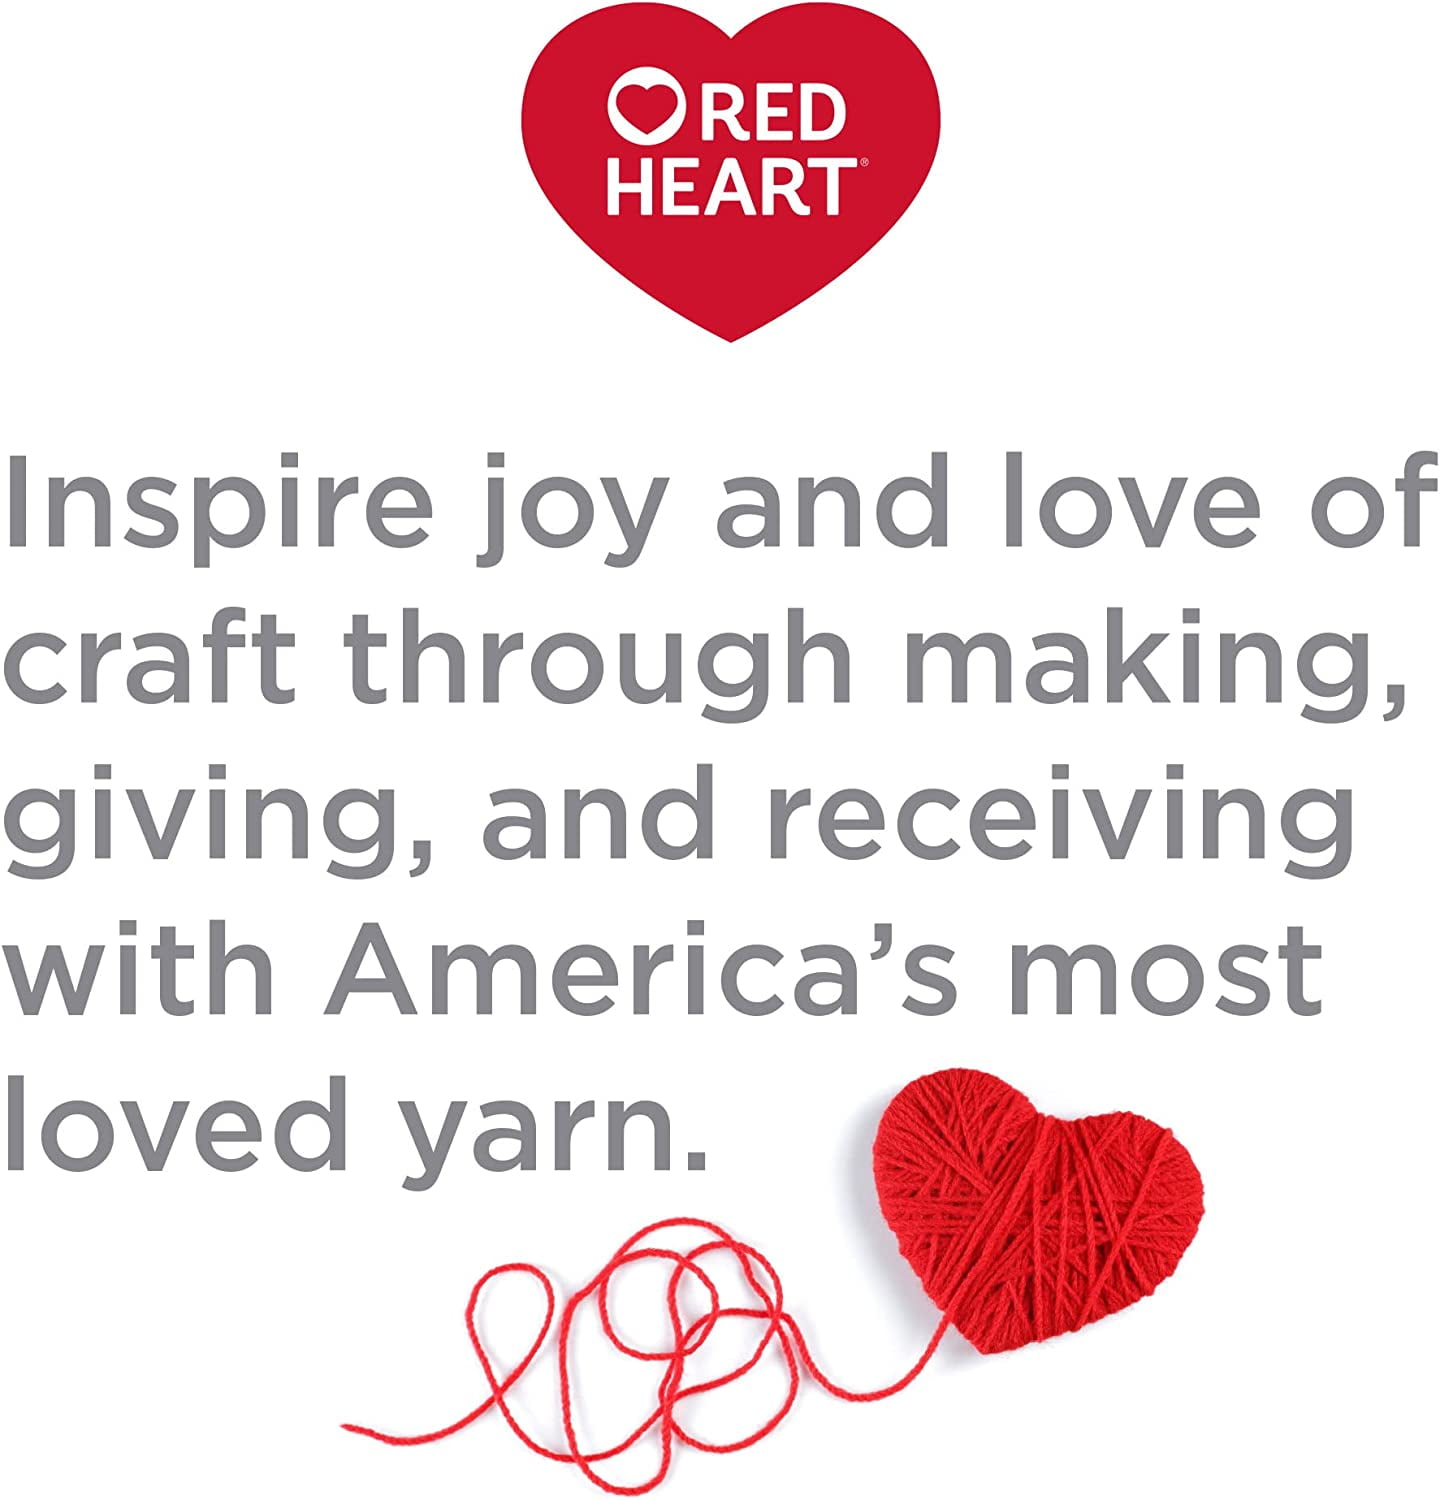 Red Heart With Love Evergreen Yarn - 3 Pack of 198g/7oz - Acrylic - 4  Medium (Worsted) - 370 Yards - Knitting/Crochet